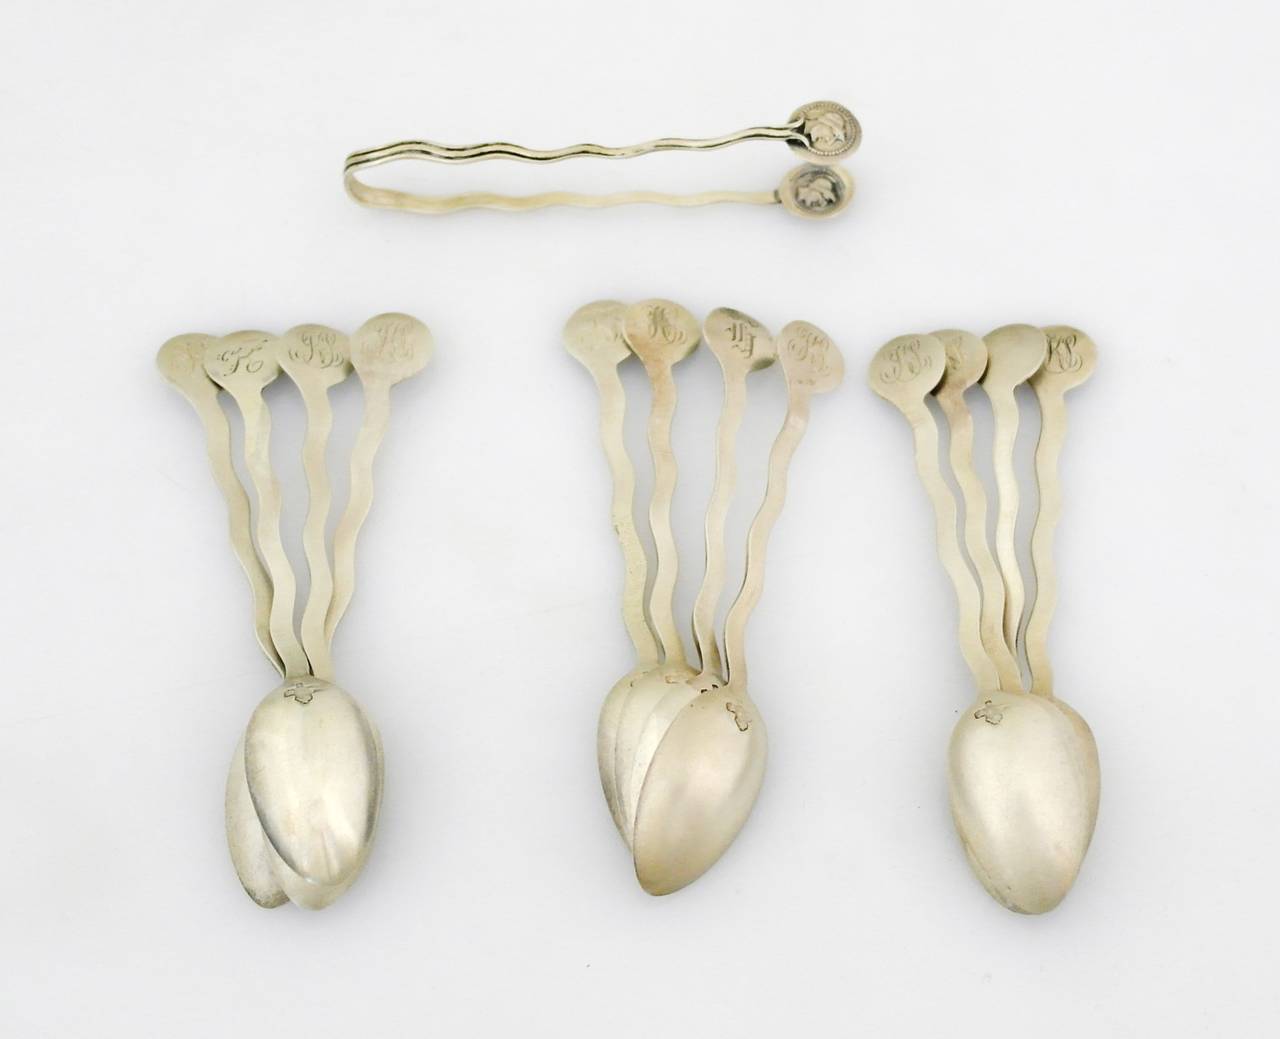 Gorham Medallion Coin Silver Demitasse Set with 12 Spoons and Sugar Tongs In Excellent Condition For Sale In New York, NY